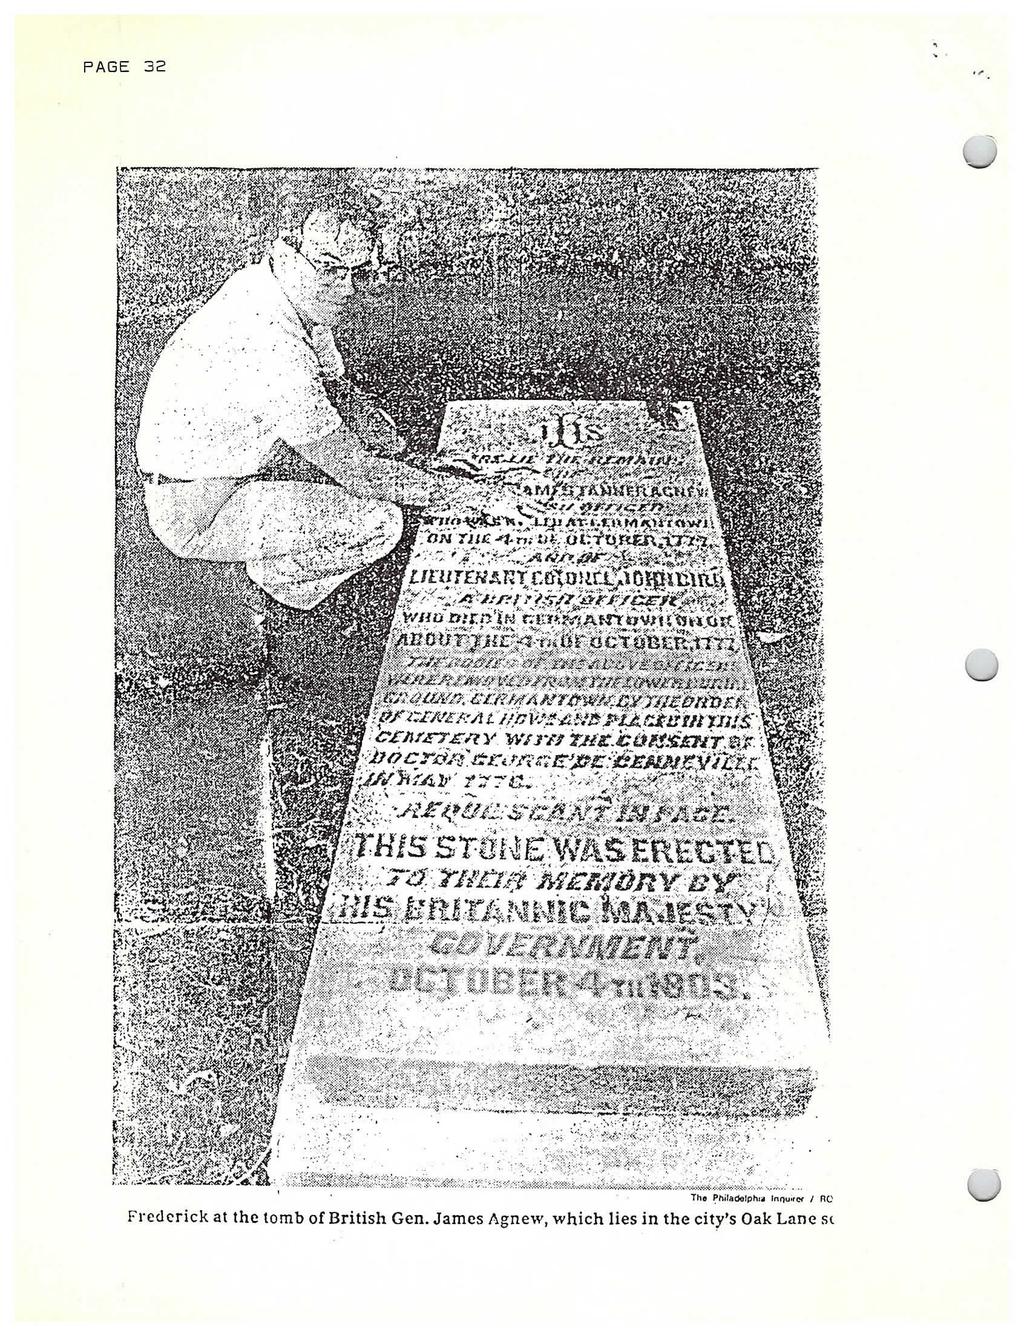 PAGE 32 0 Fl.ederick t the tomb of British Gen.